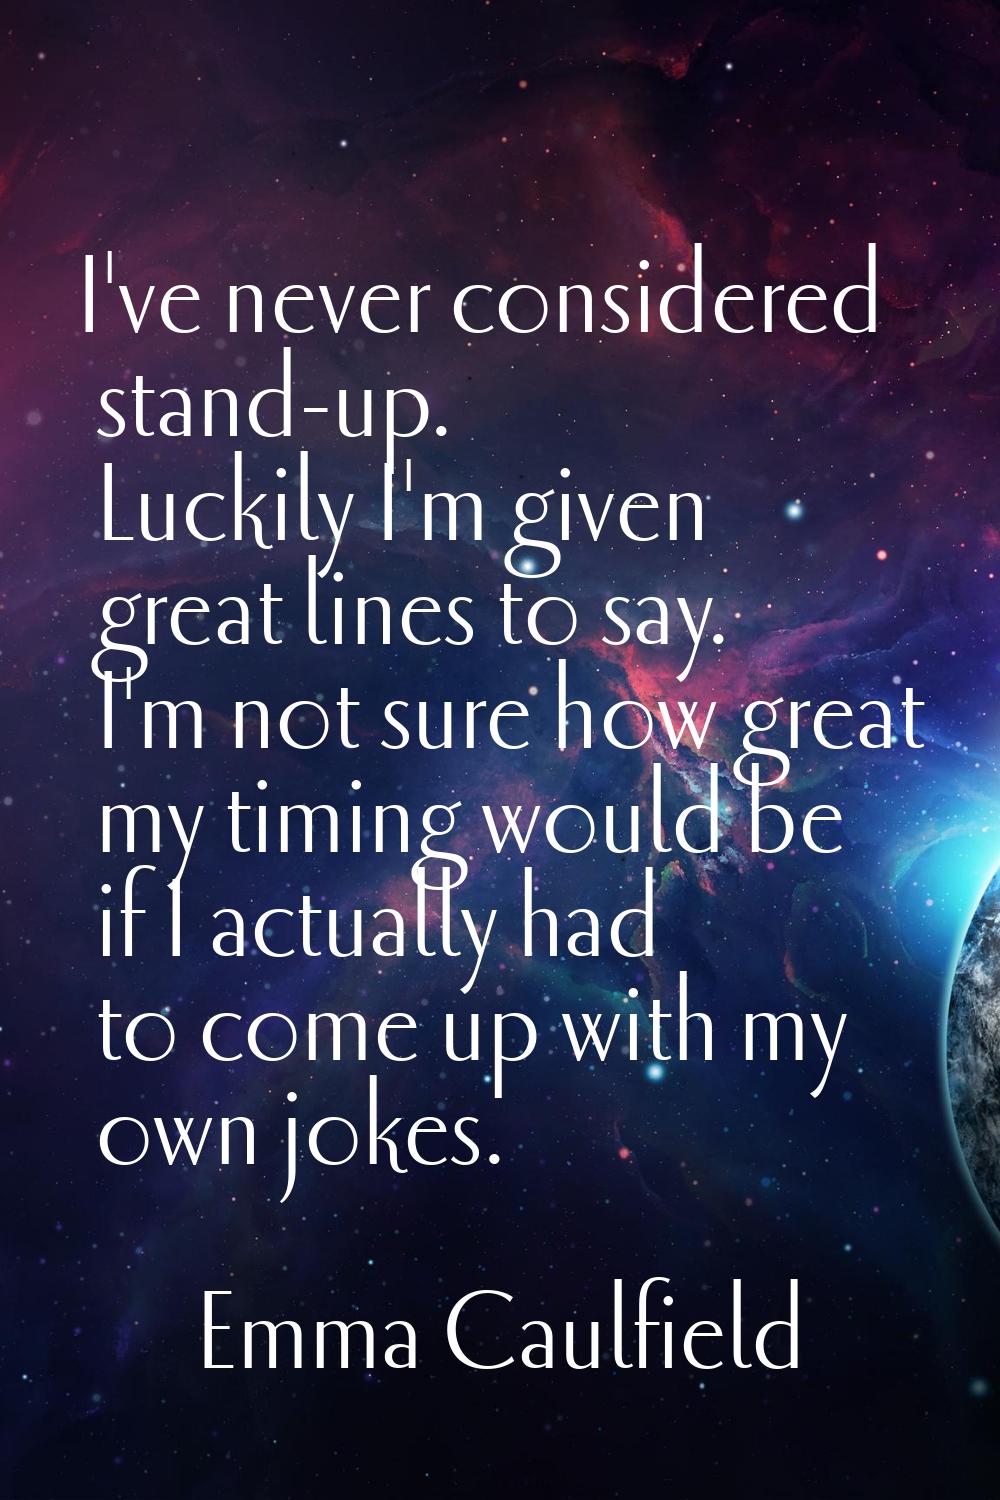 I've never considered stand-up. Luckily I'm given great lines to say. I'm not sure how great my tim